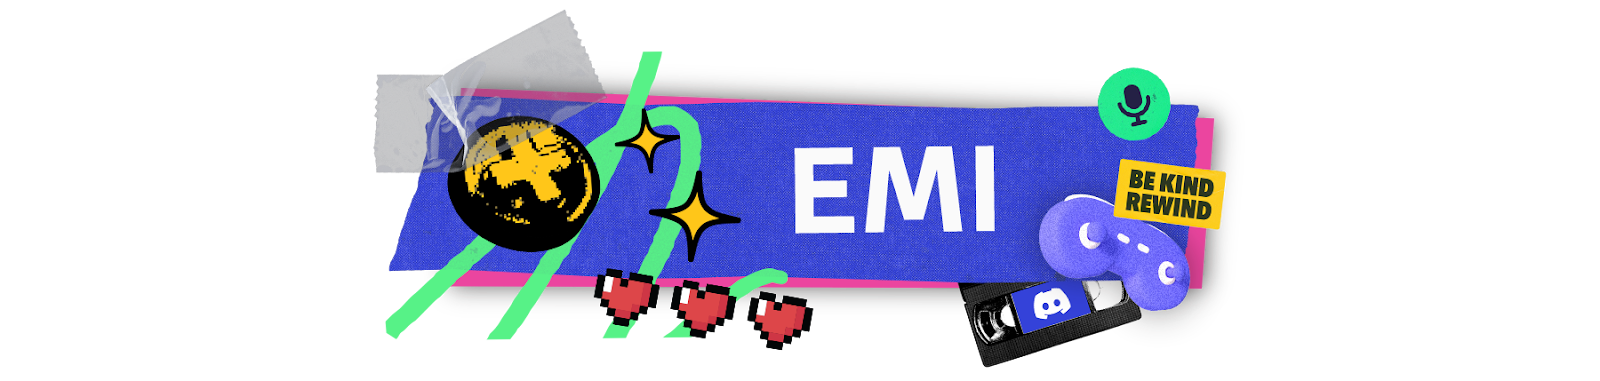 A stylized nameplate that says “Emi.” Icons and imagery of gamepads, microphones, and VHS tapes surround the nameplate.